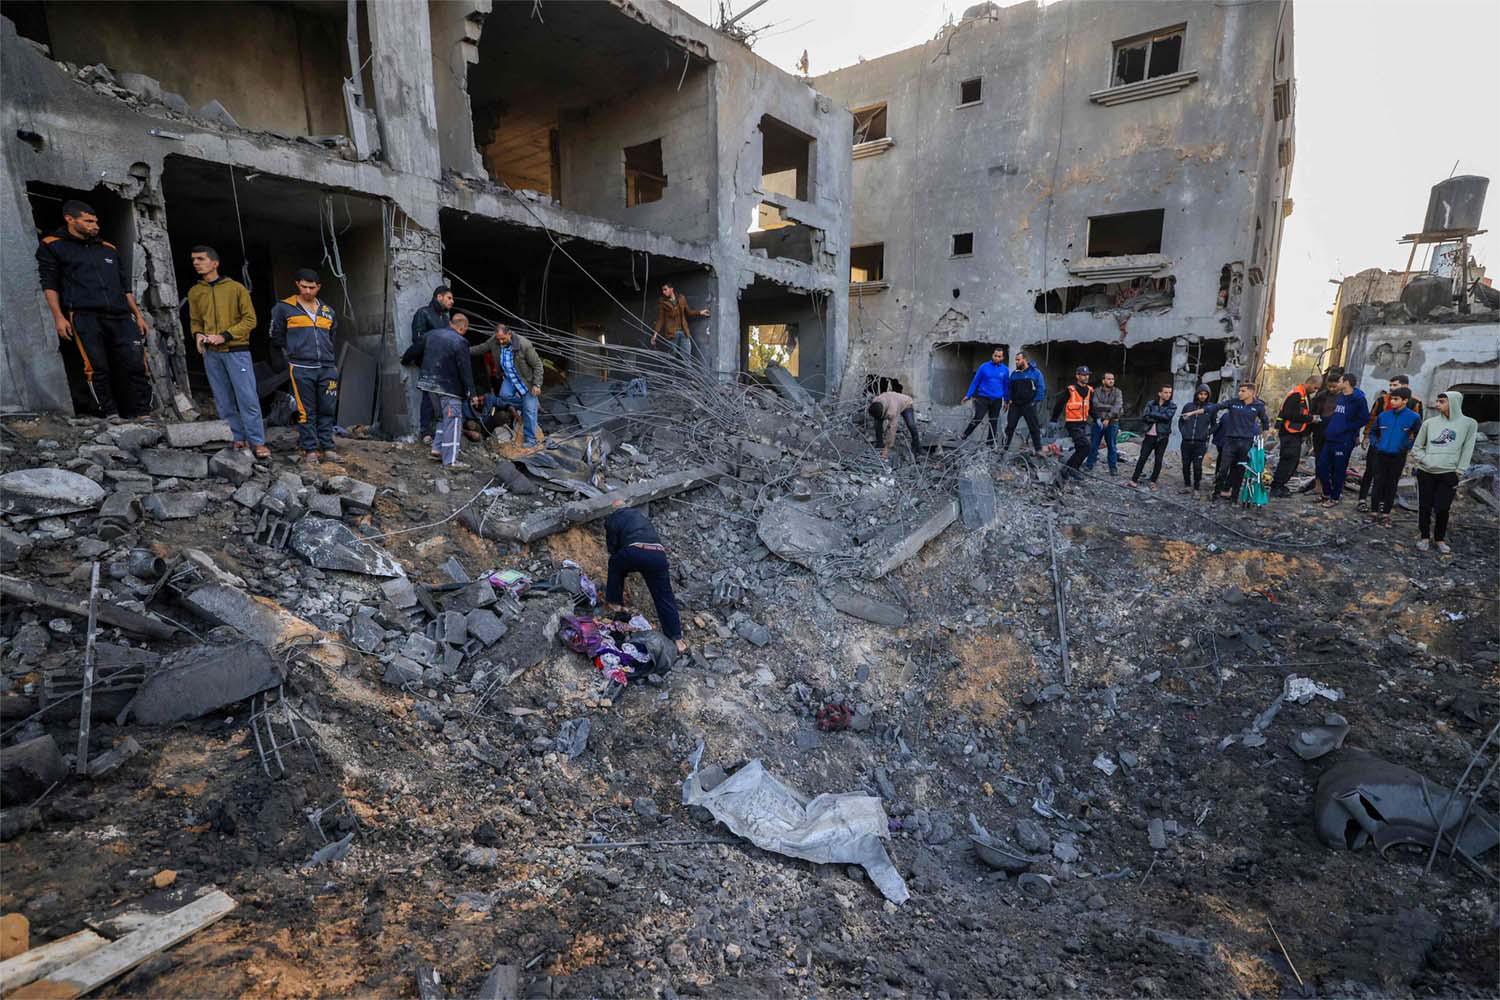 Rescuers look for survivors in the rubble of the al-Agha family home following an Israeli strike in Khan Younis on the southern Gaza Strip